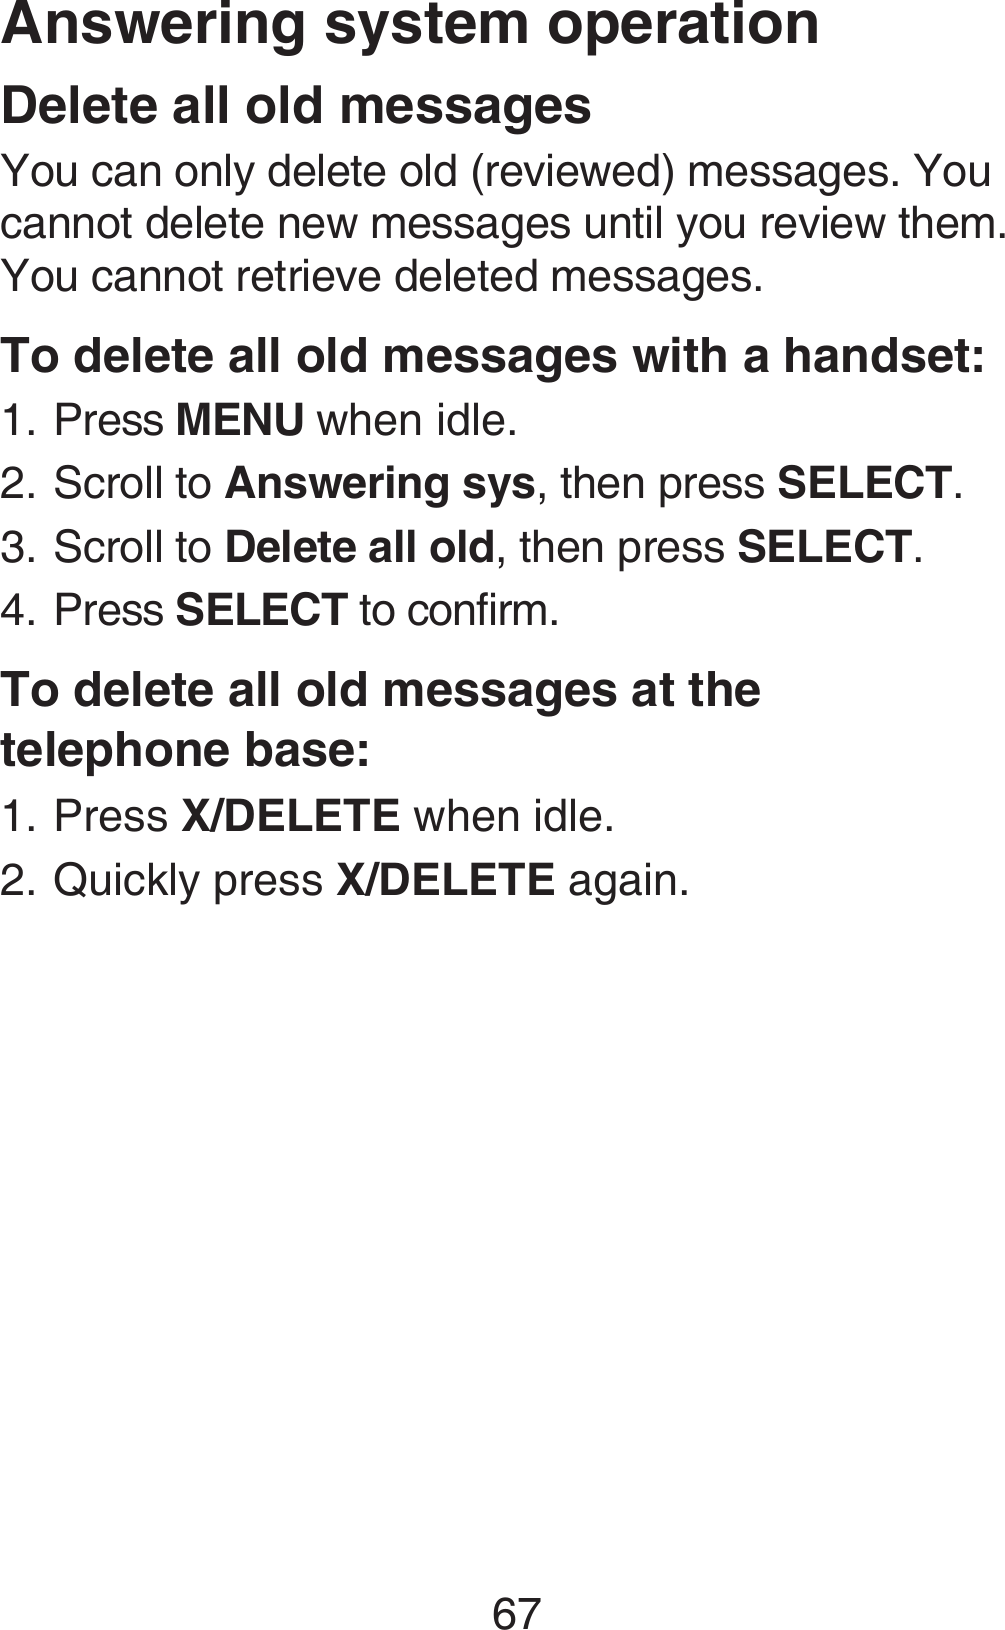 67Delete all old messagesYou can only delete old (reviewed) messages. You cannot delete new messages until you review them. You cannot retrieve deleted messages.To delete all old messages with a handset:Press MENU when idle.Scroll to Answering sys, then press SELECT.Scroll to Delete all old, then press SELECT.Press SELECT to confirm.To delete all old messages at the  telephone base:Press X/DELETE when idle.Quickly press X/DELETE again.1.2.3.4.1.2.Answering system operation